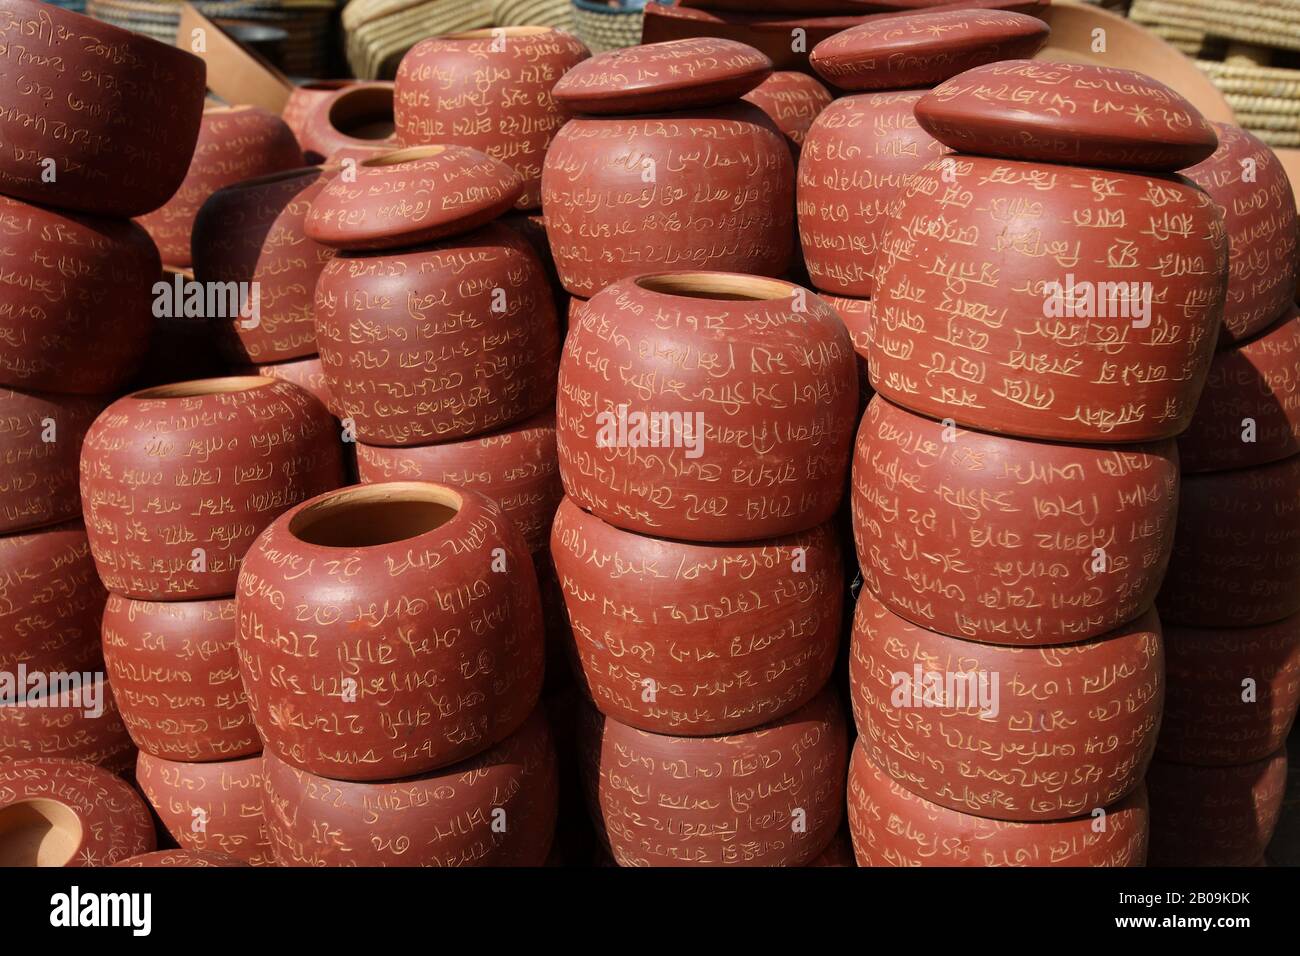 Colourful  pottery shop  on the occasion of Jabbar er Boli khela, a century old wrestling competition, one of the oldest traditions of Chittagong in Bangladesh, held in the first month of the Bangla year- Baishakh. April 25, 2009. Stock Photo